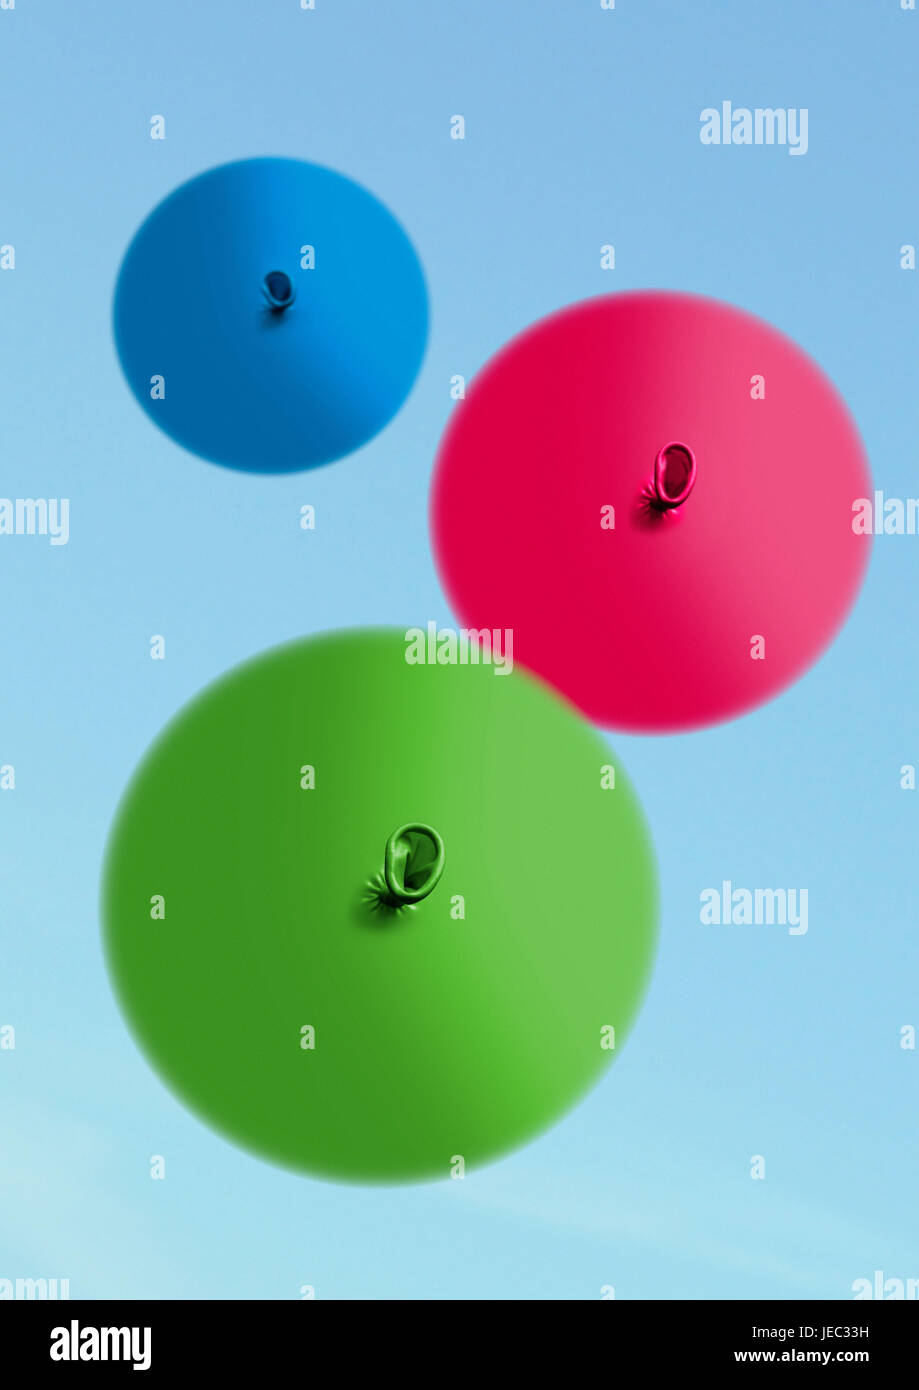 Balloons from below, Stock Photo